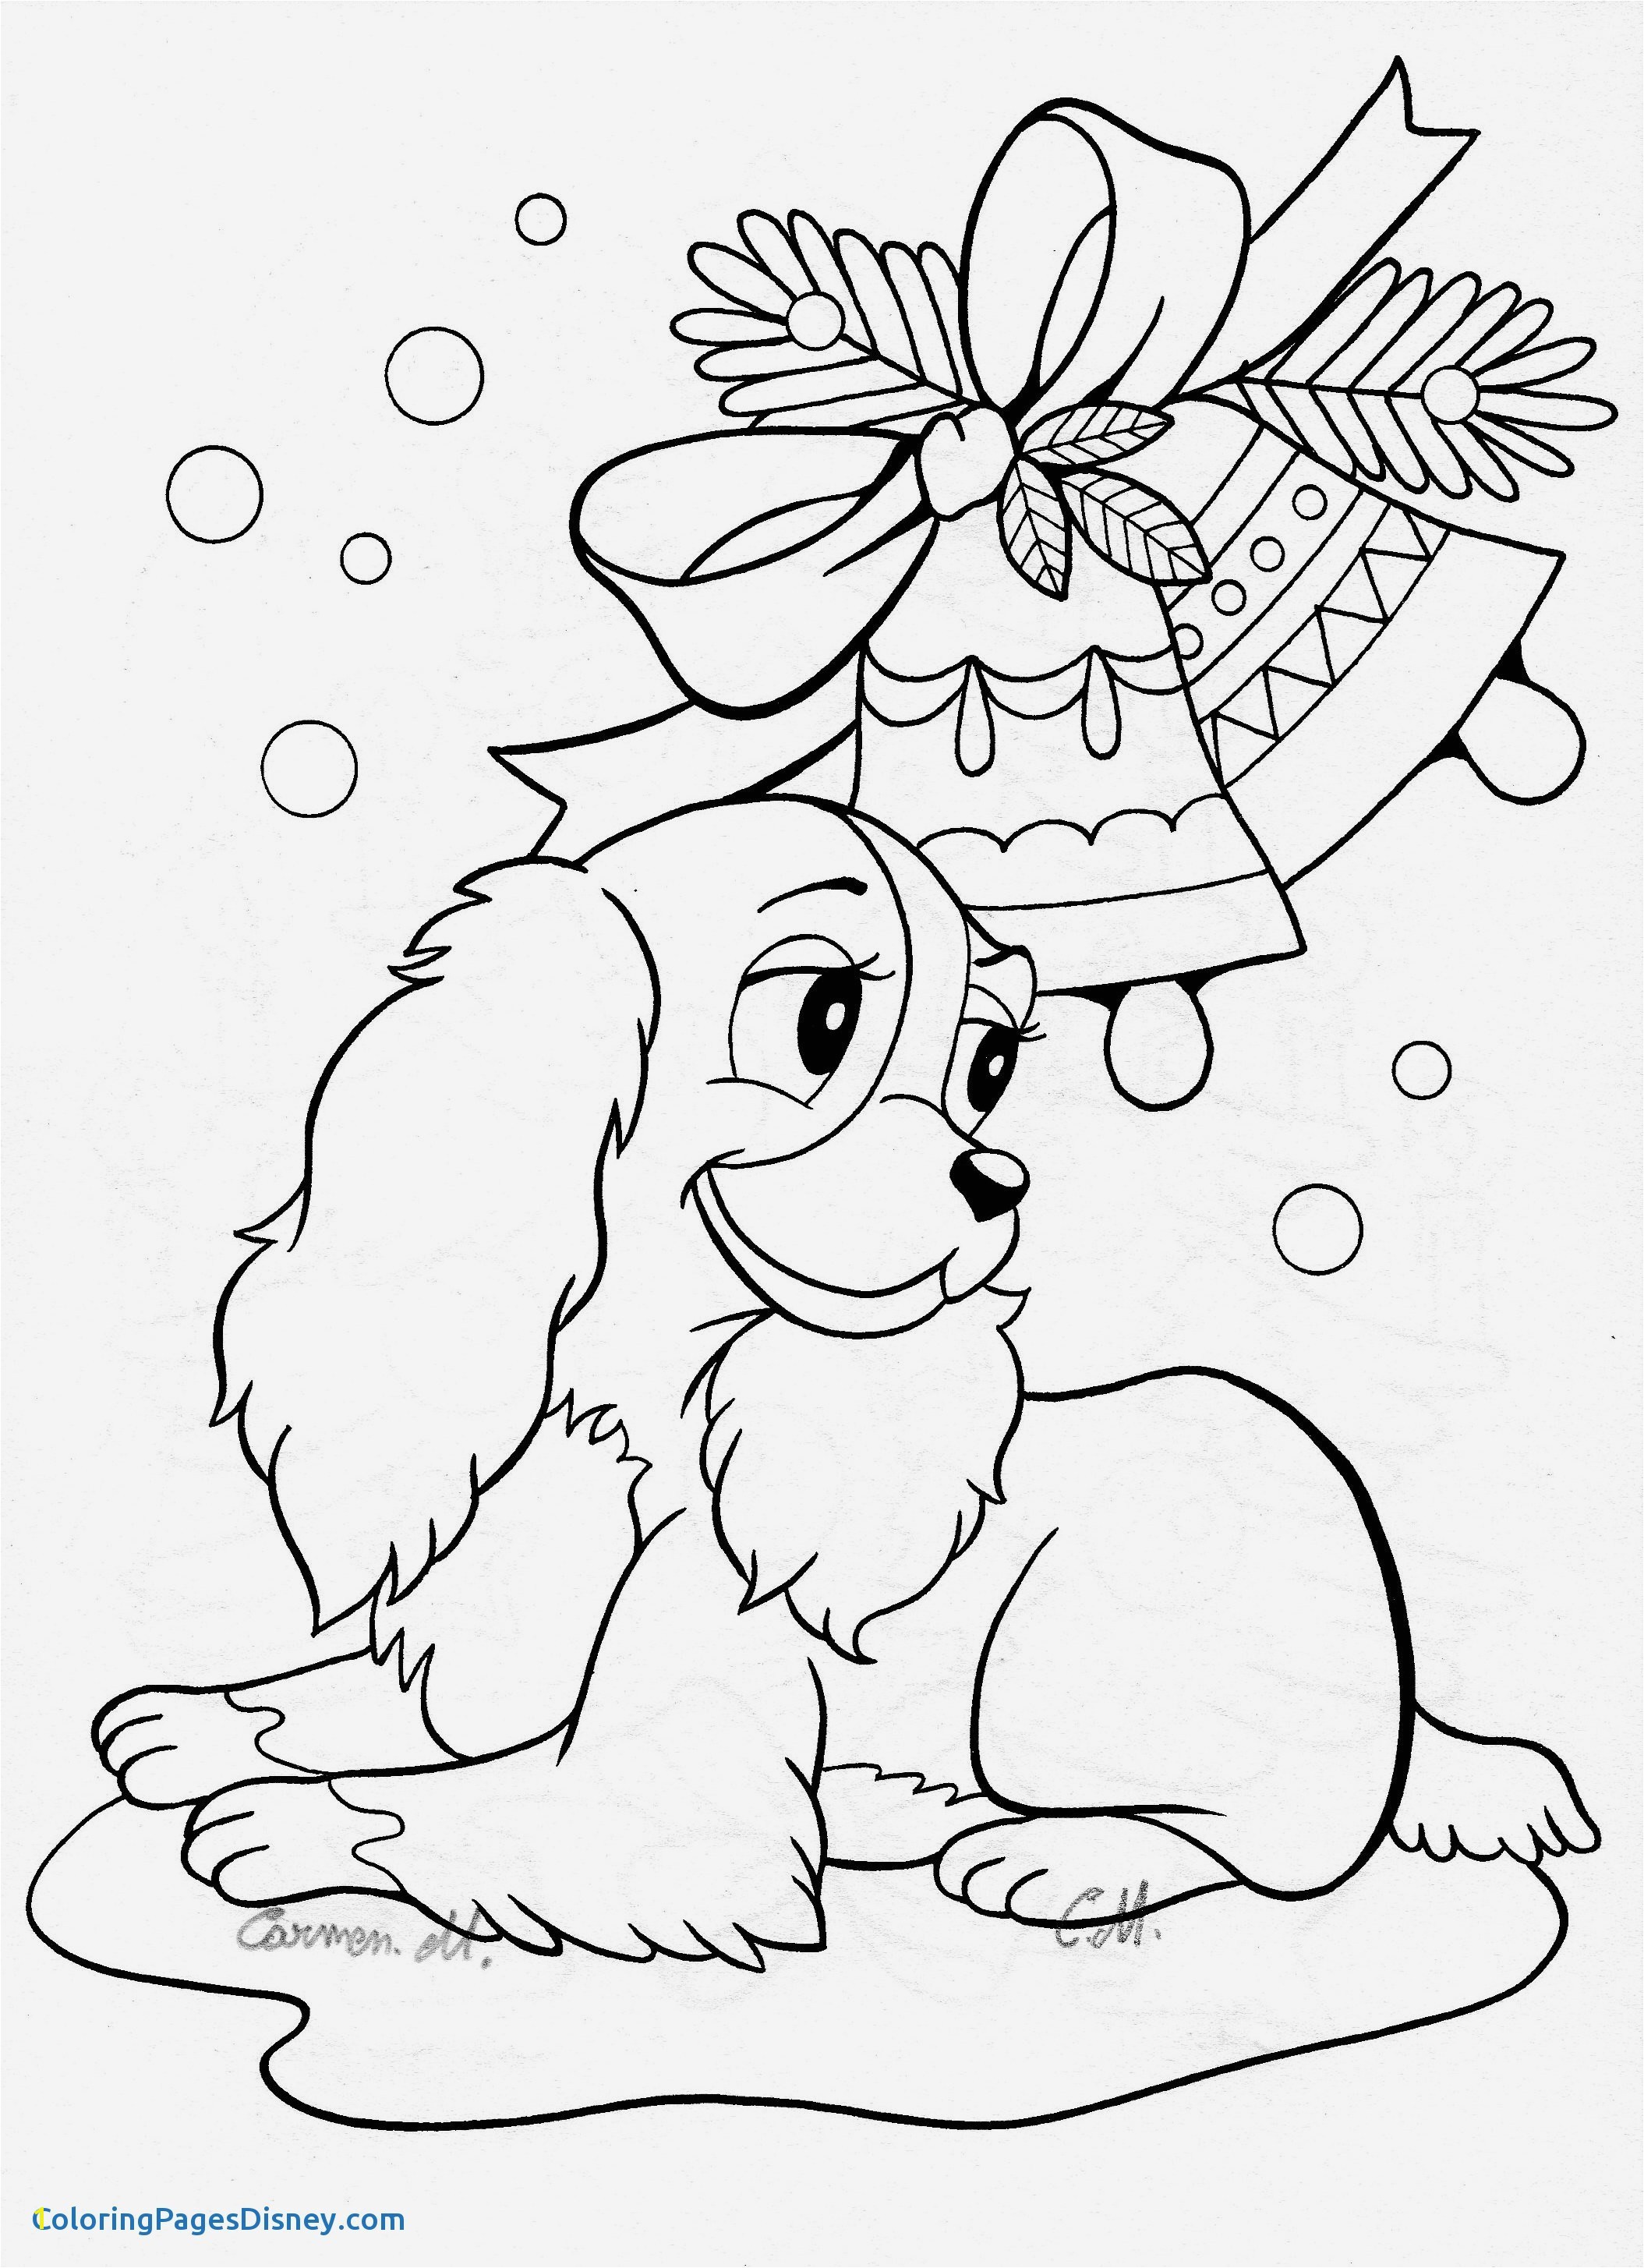 Animal Printable Coloring Pages 11 Elegant Free Animal Coloring Pages